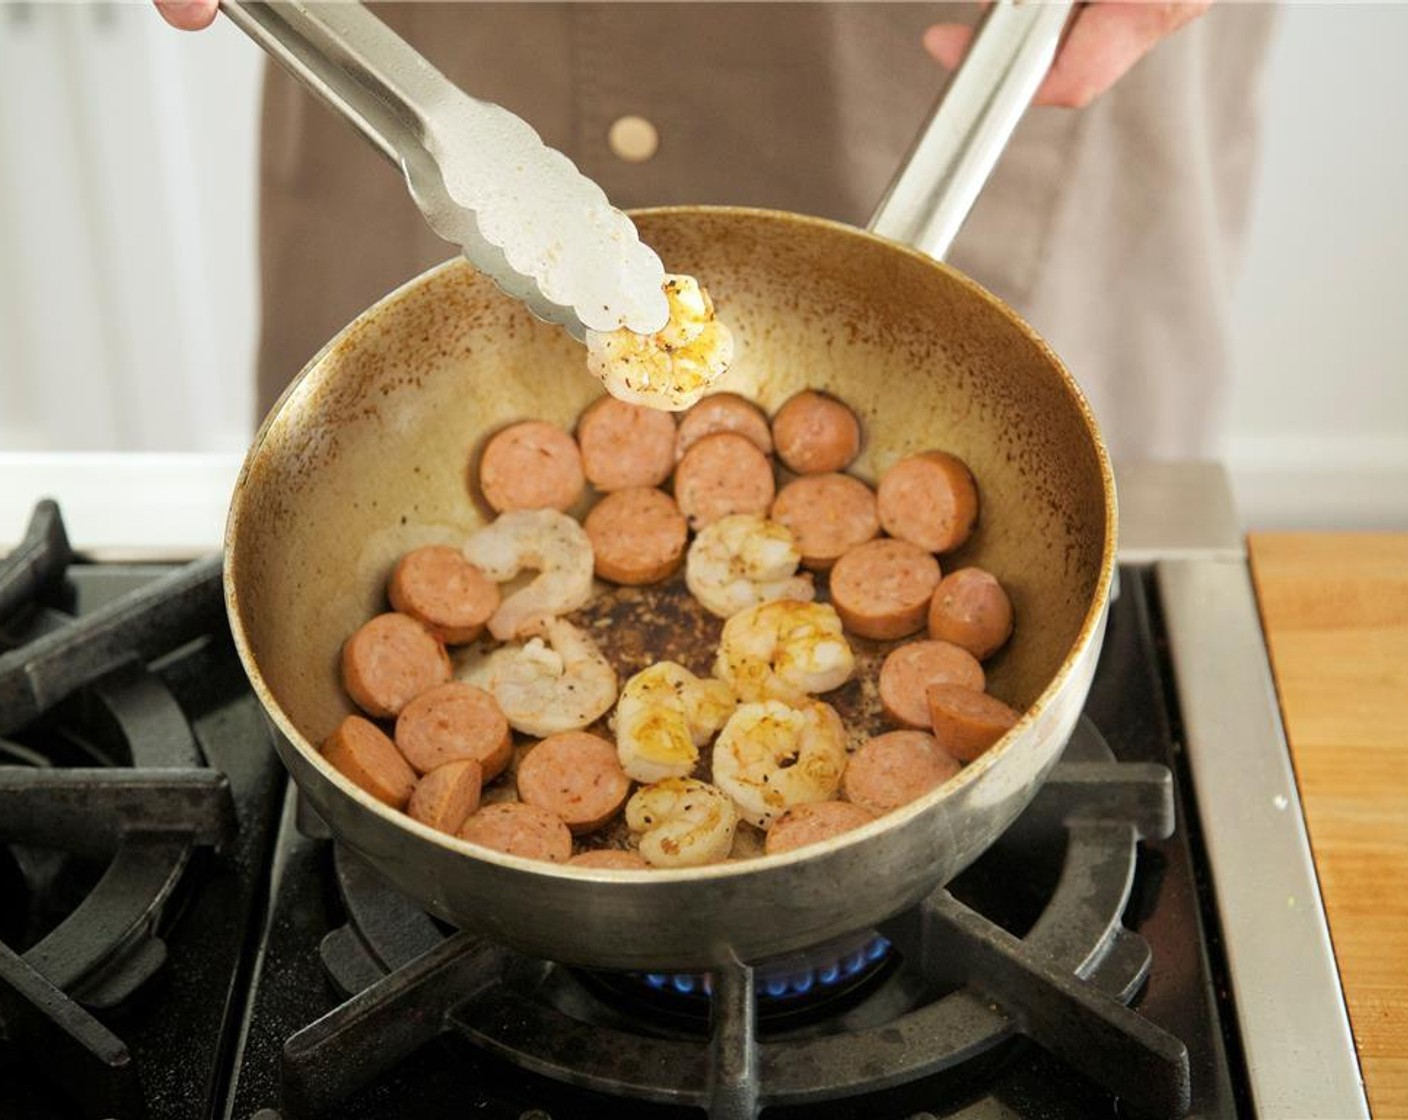 step 12 Add sausage and shrimp to pan. Sear sausage on one side for two minutes, flip shrimp after one minute and cook another minute on the opposite side. Remove sausage and shrimp, and add to the chicken in the bowl.